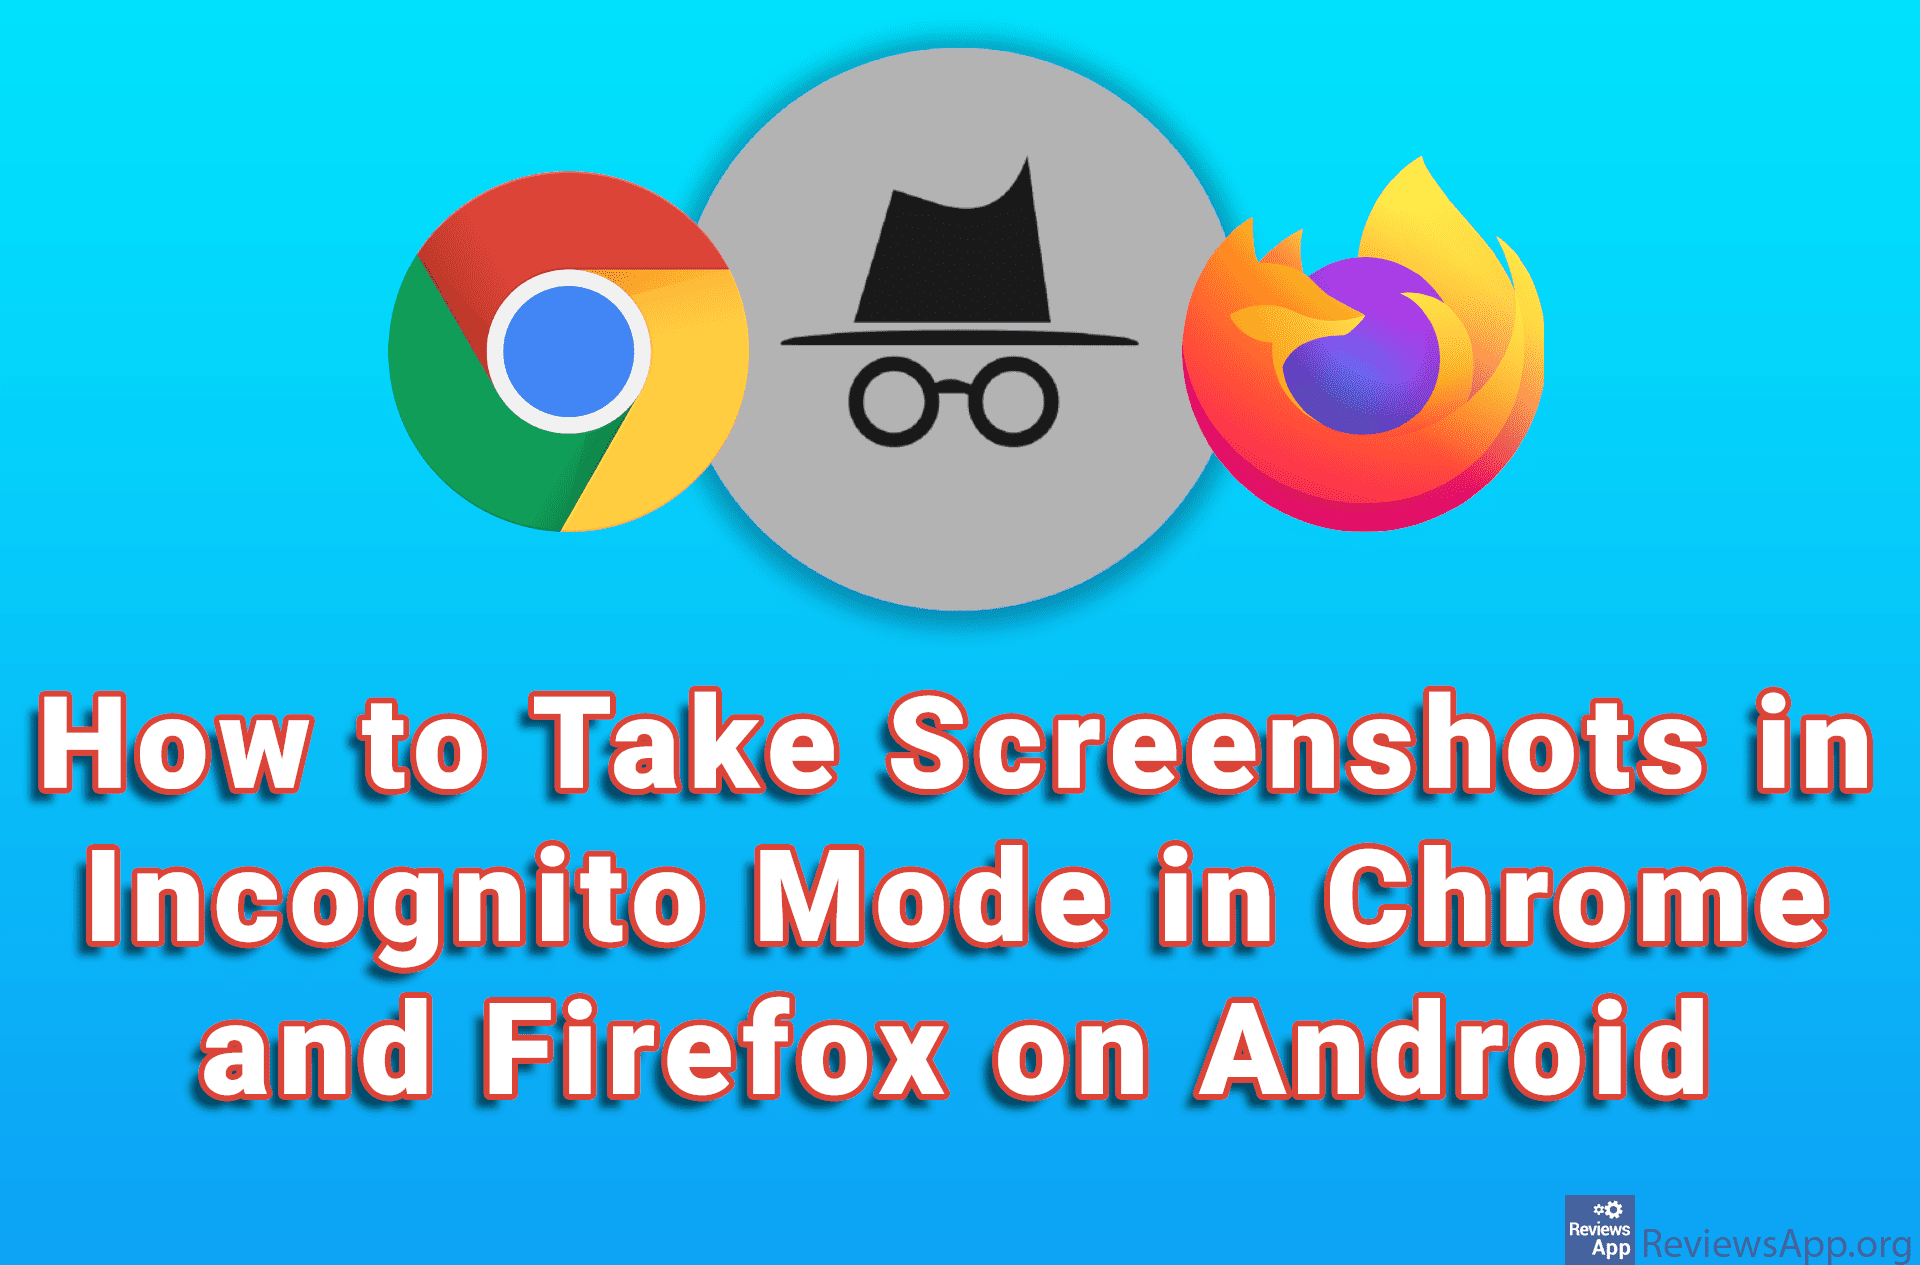 How to Take Screenshots in Incognito Mode in Chrome and Firefox on Android